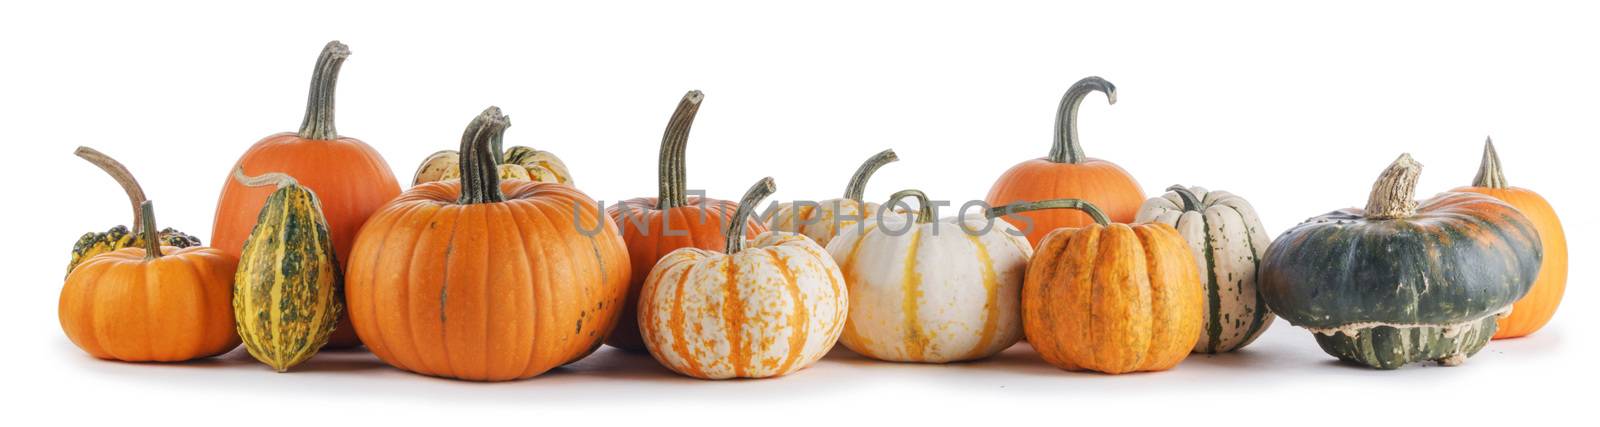 Assortiment of pumpkins on white by Yellowj